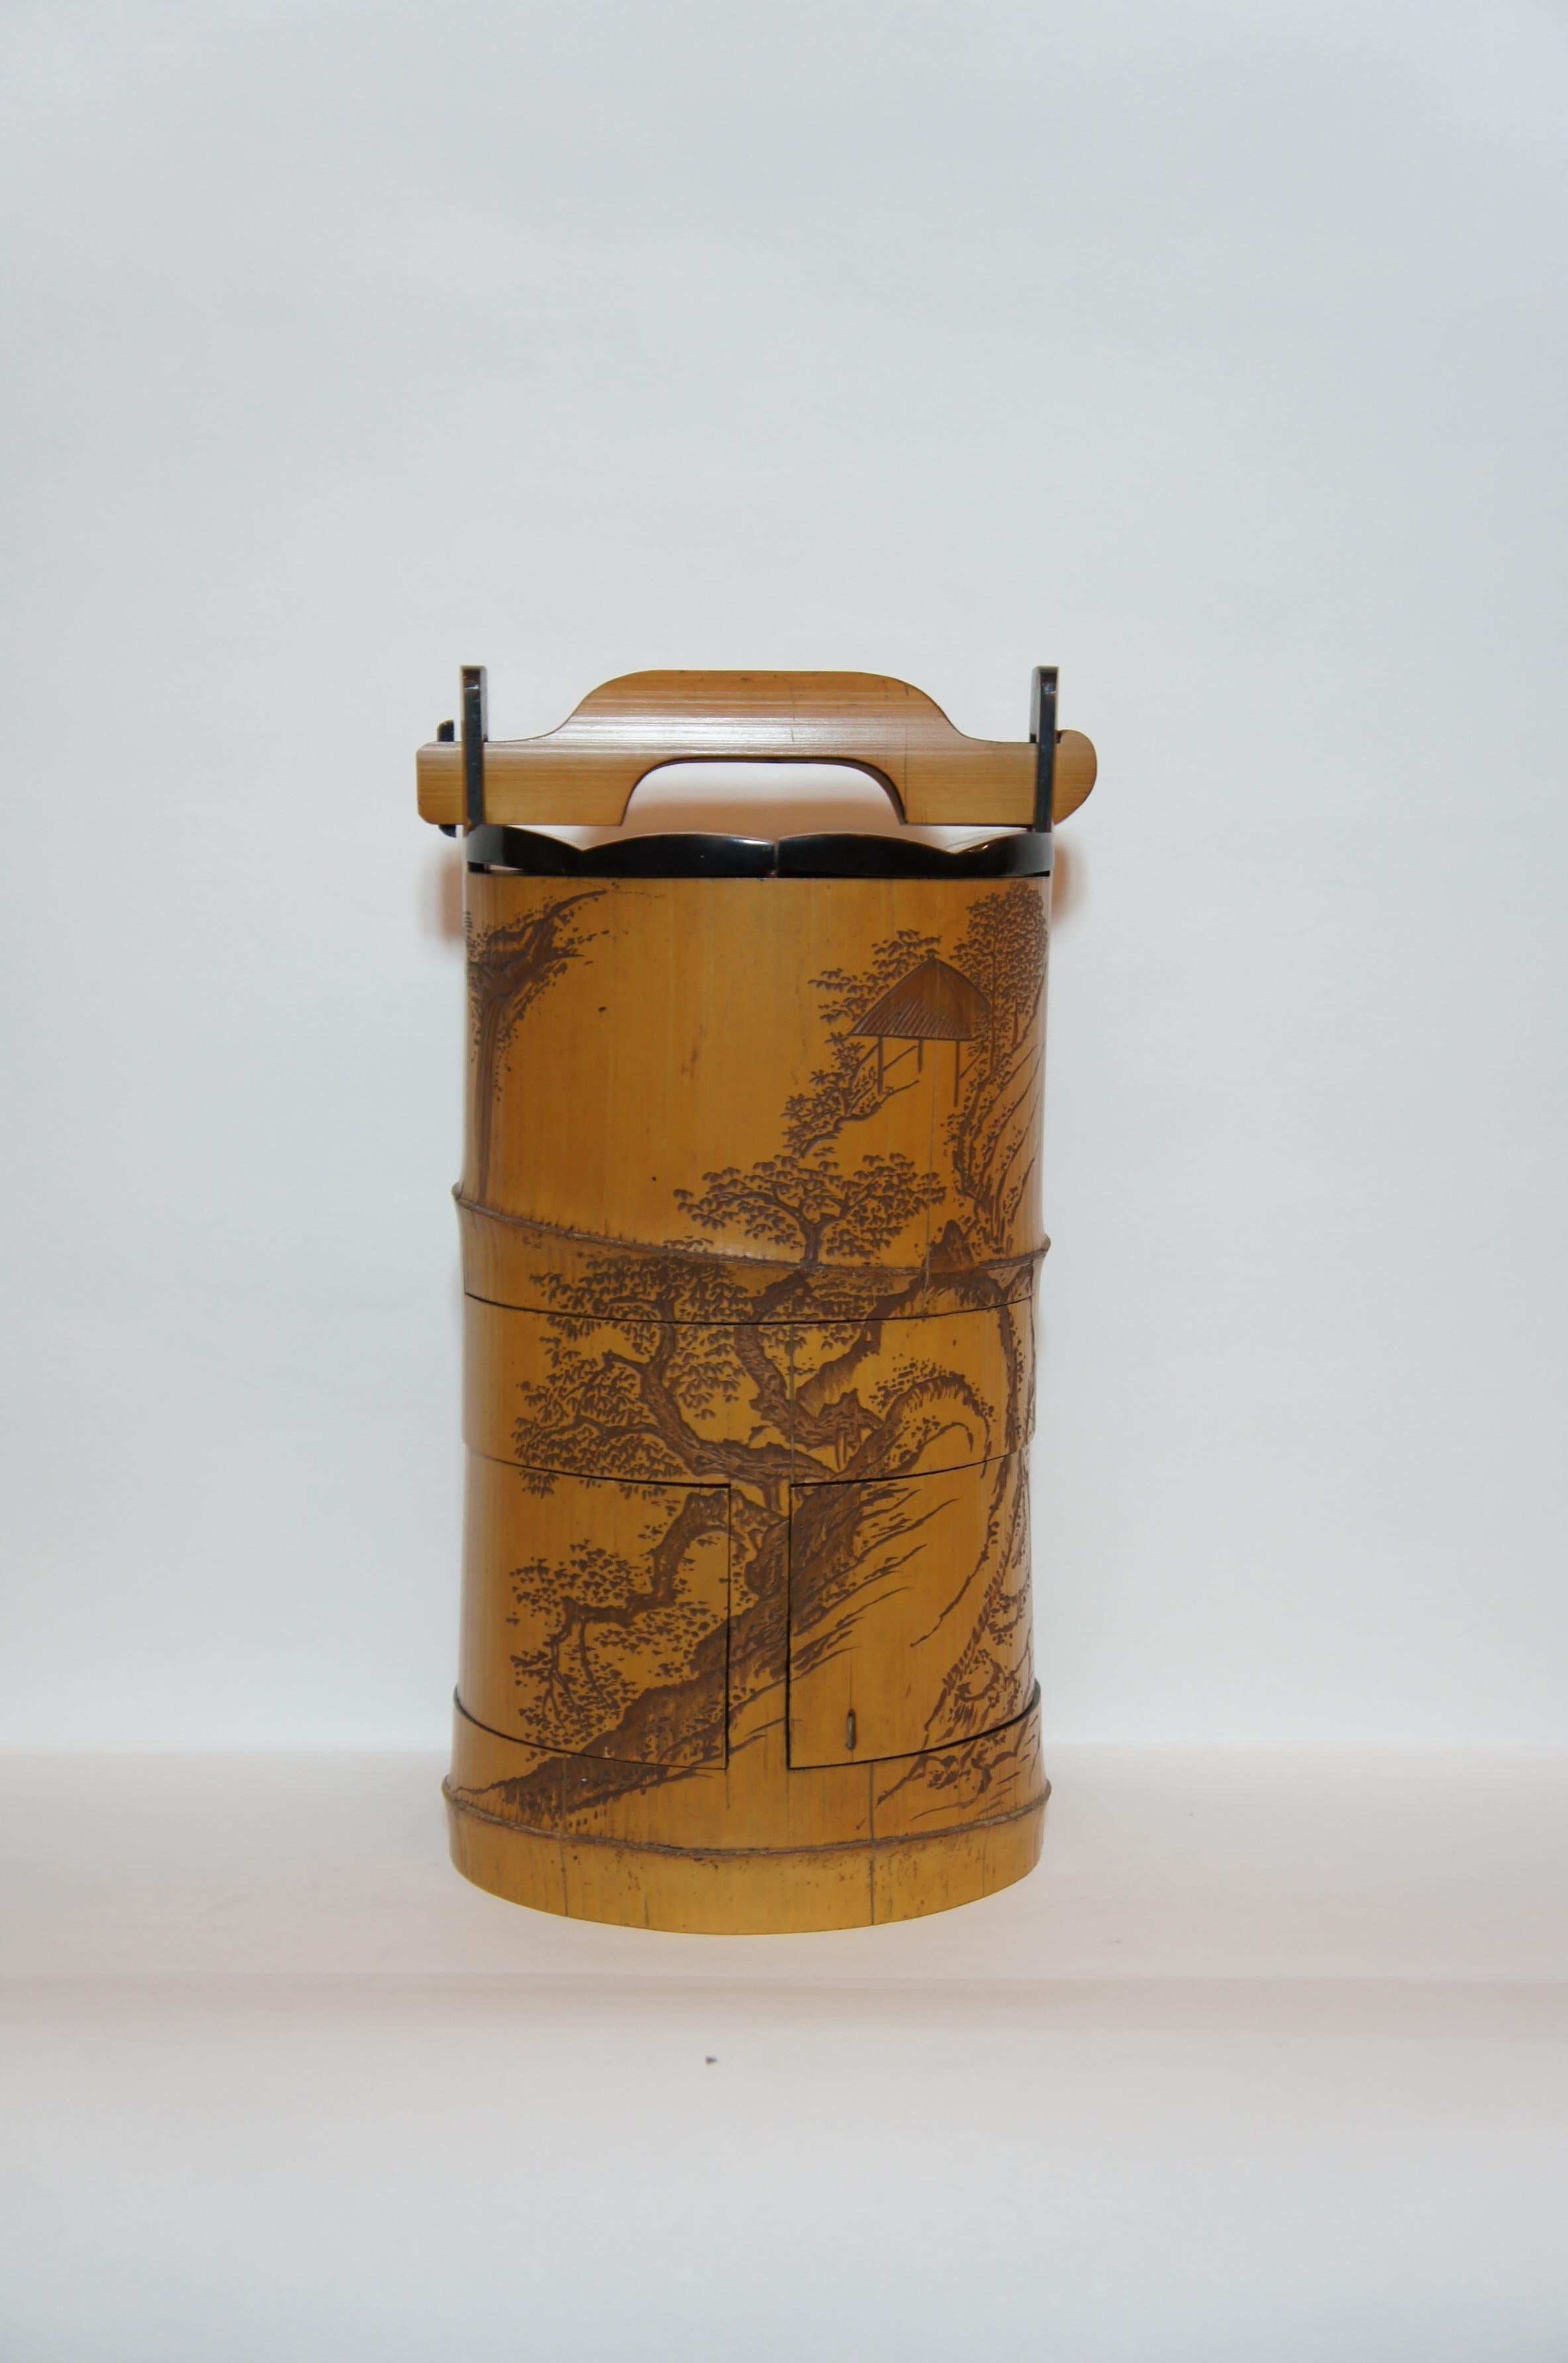 This is an antique Japanese bento box from Edo era which was used for cherry blossom viewing party. It is made with bamboo and painted with Japanese lacquer. Landscapes with water falls and some pine trees are carved into the surface.